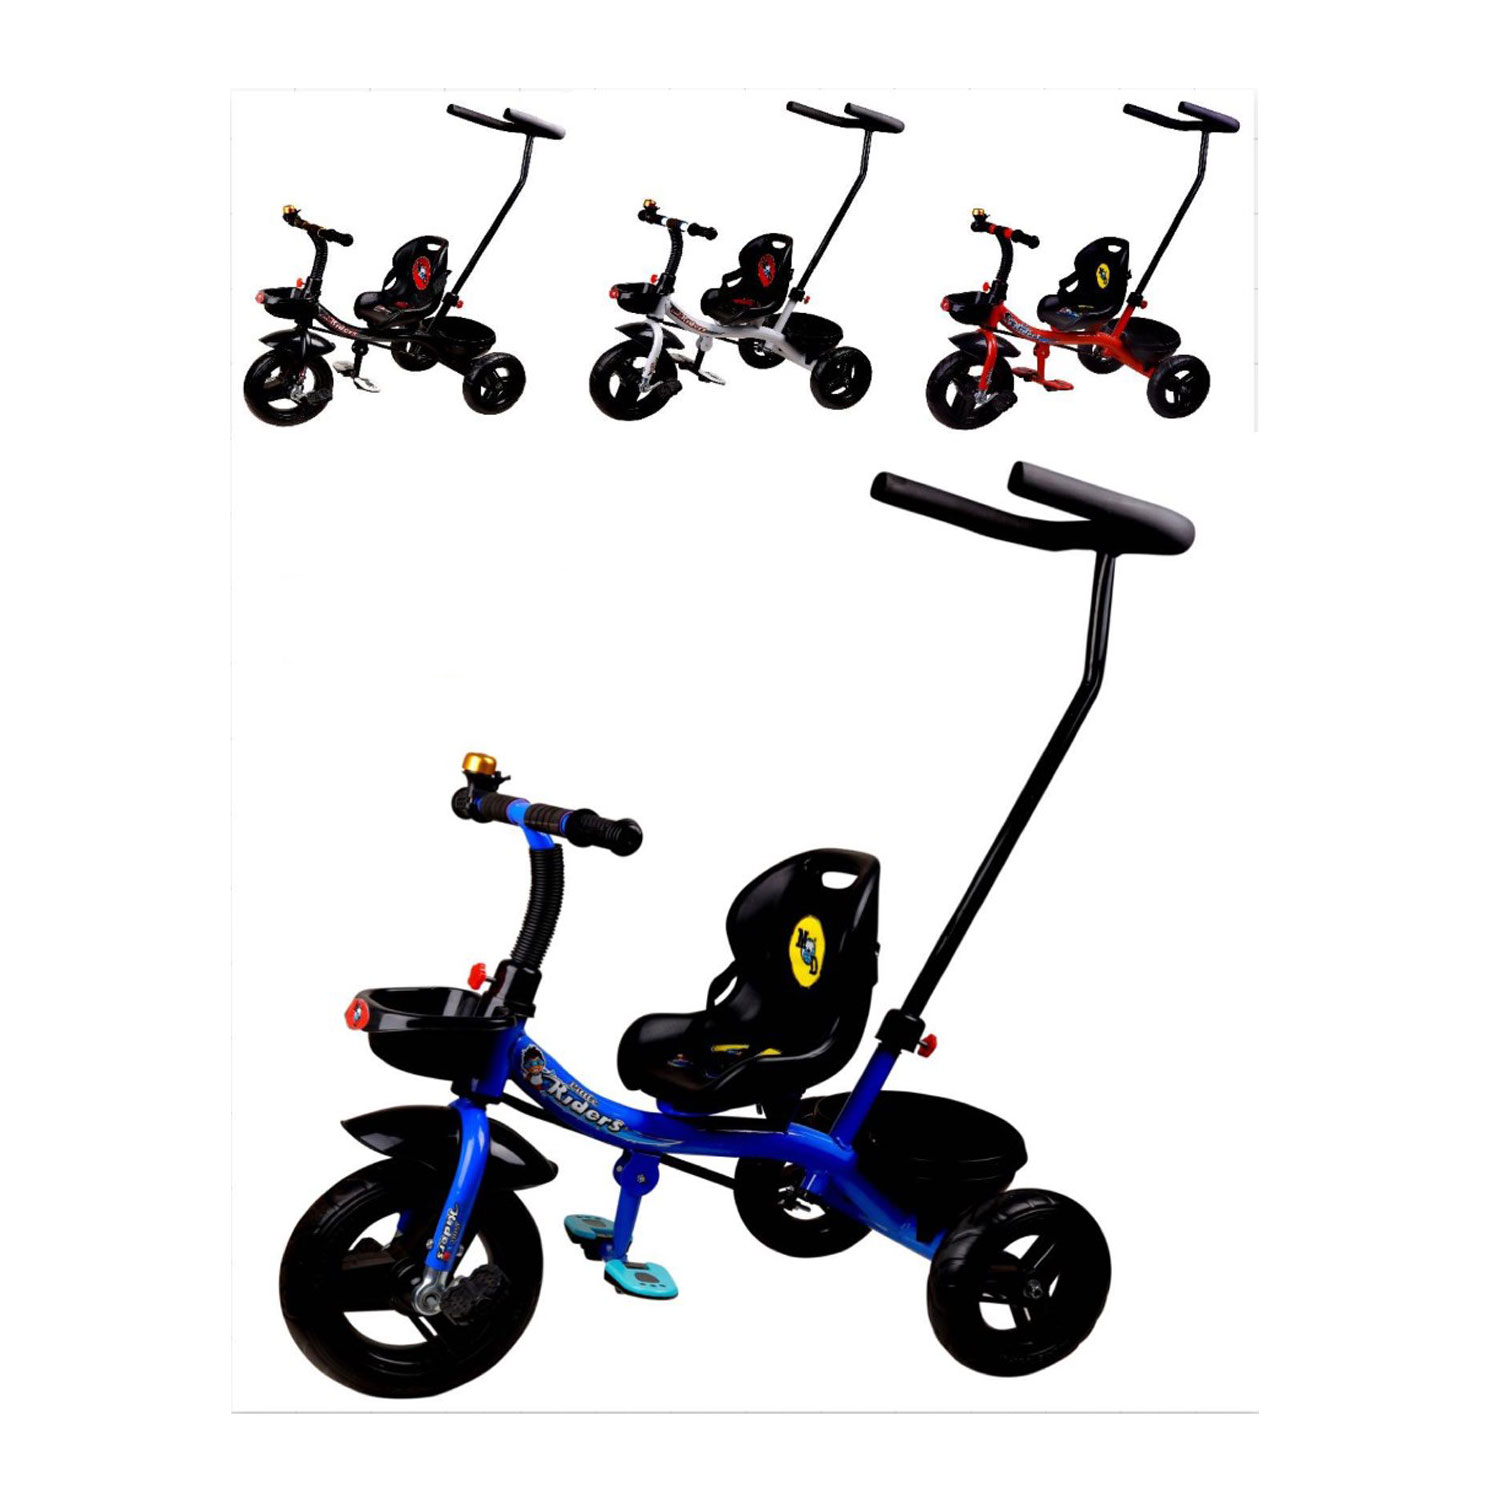 NAVRANGI BABY TRICYCLE FOR KIDS WITH FRONT OR BACK BASKET AND PARENT HANDLE. TRICYCLE FOR KIDS KBQ-154 